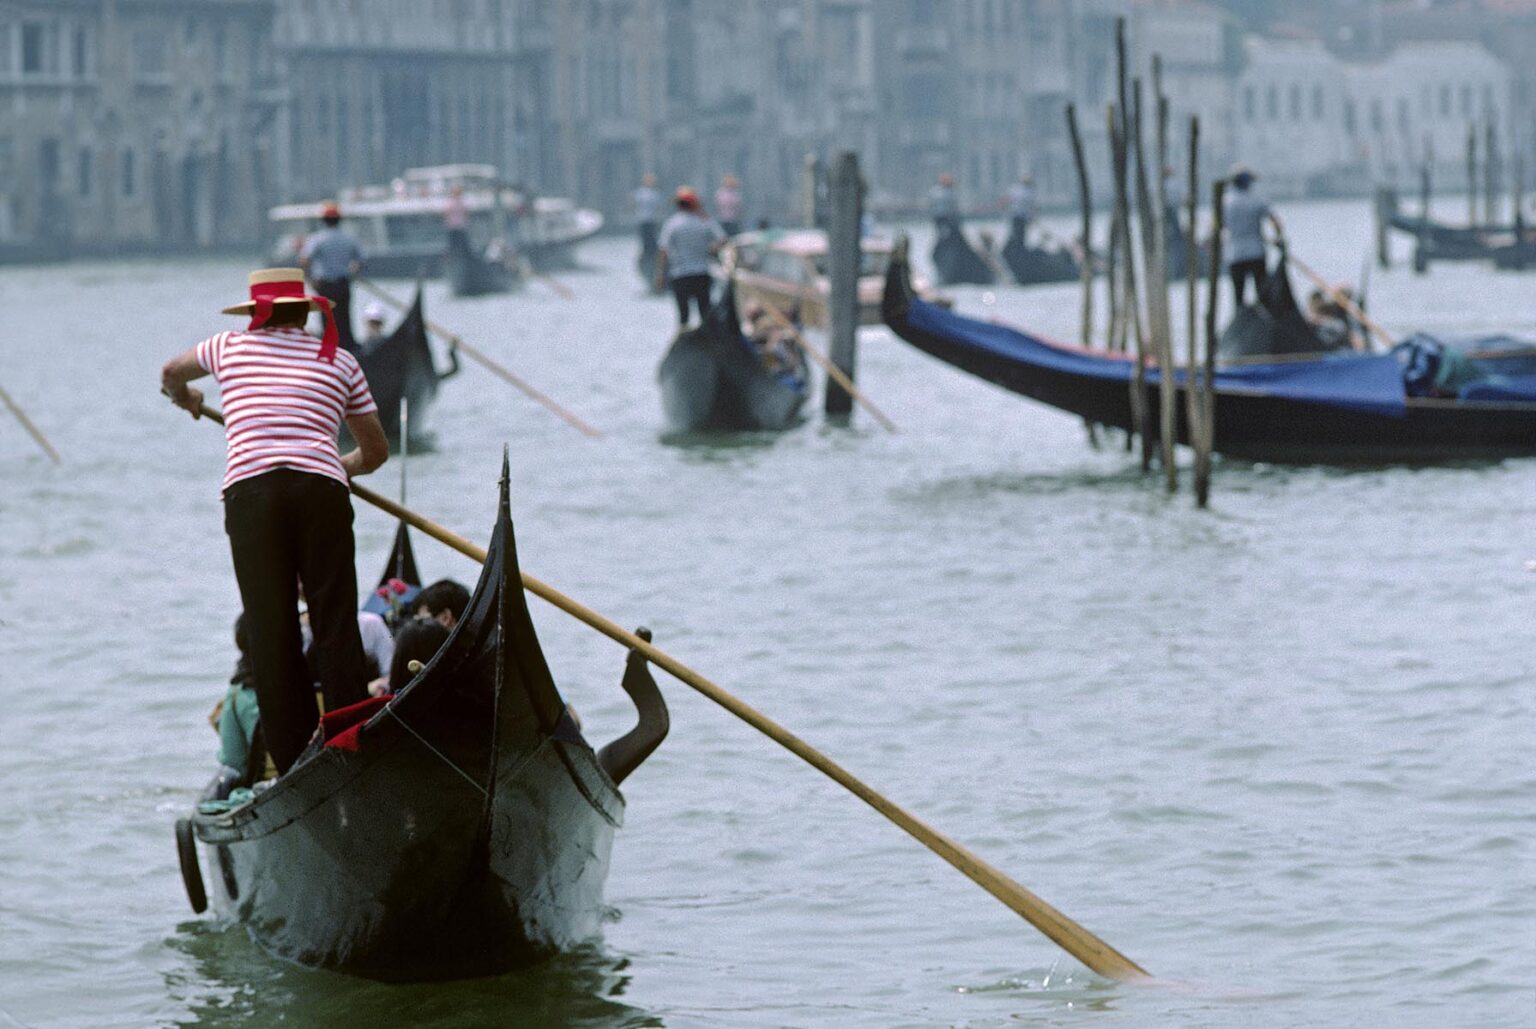 A GONDOLA CAPTAIN steers his vessel through the canals of VENICE - ITALY